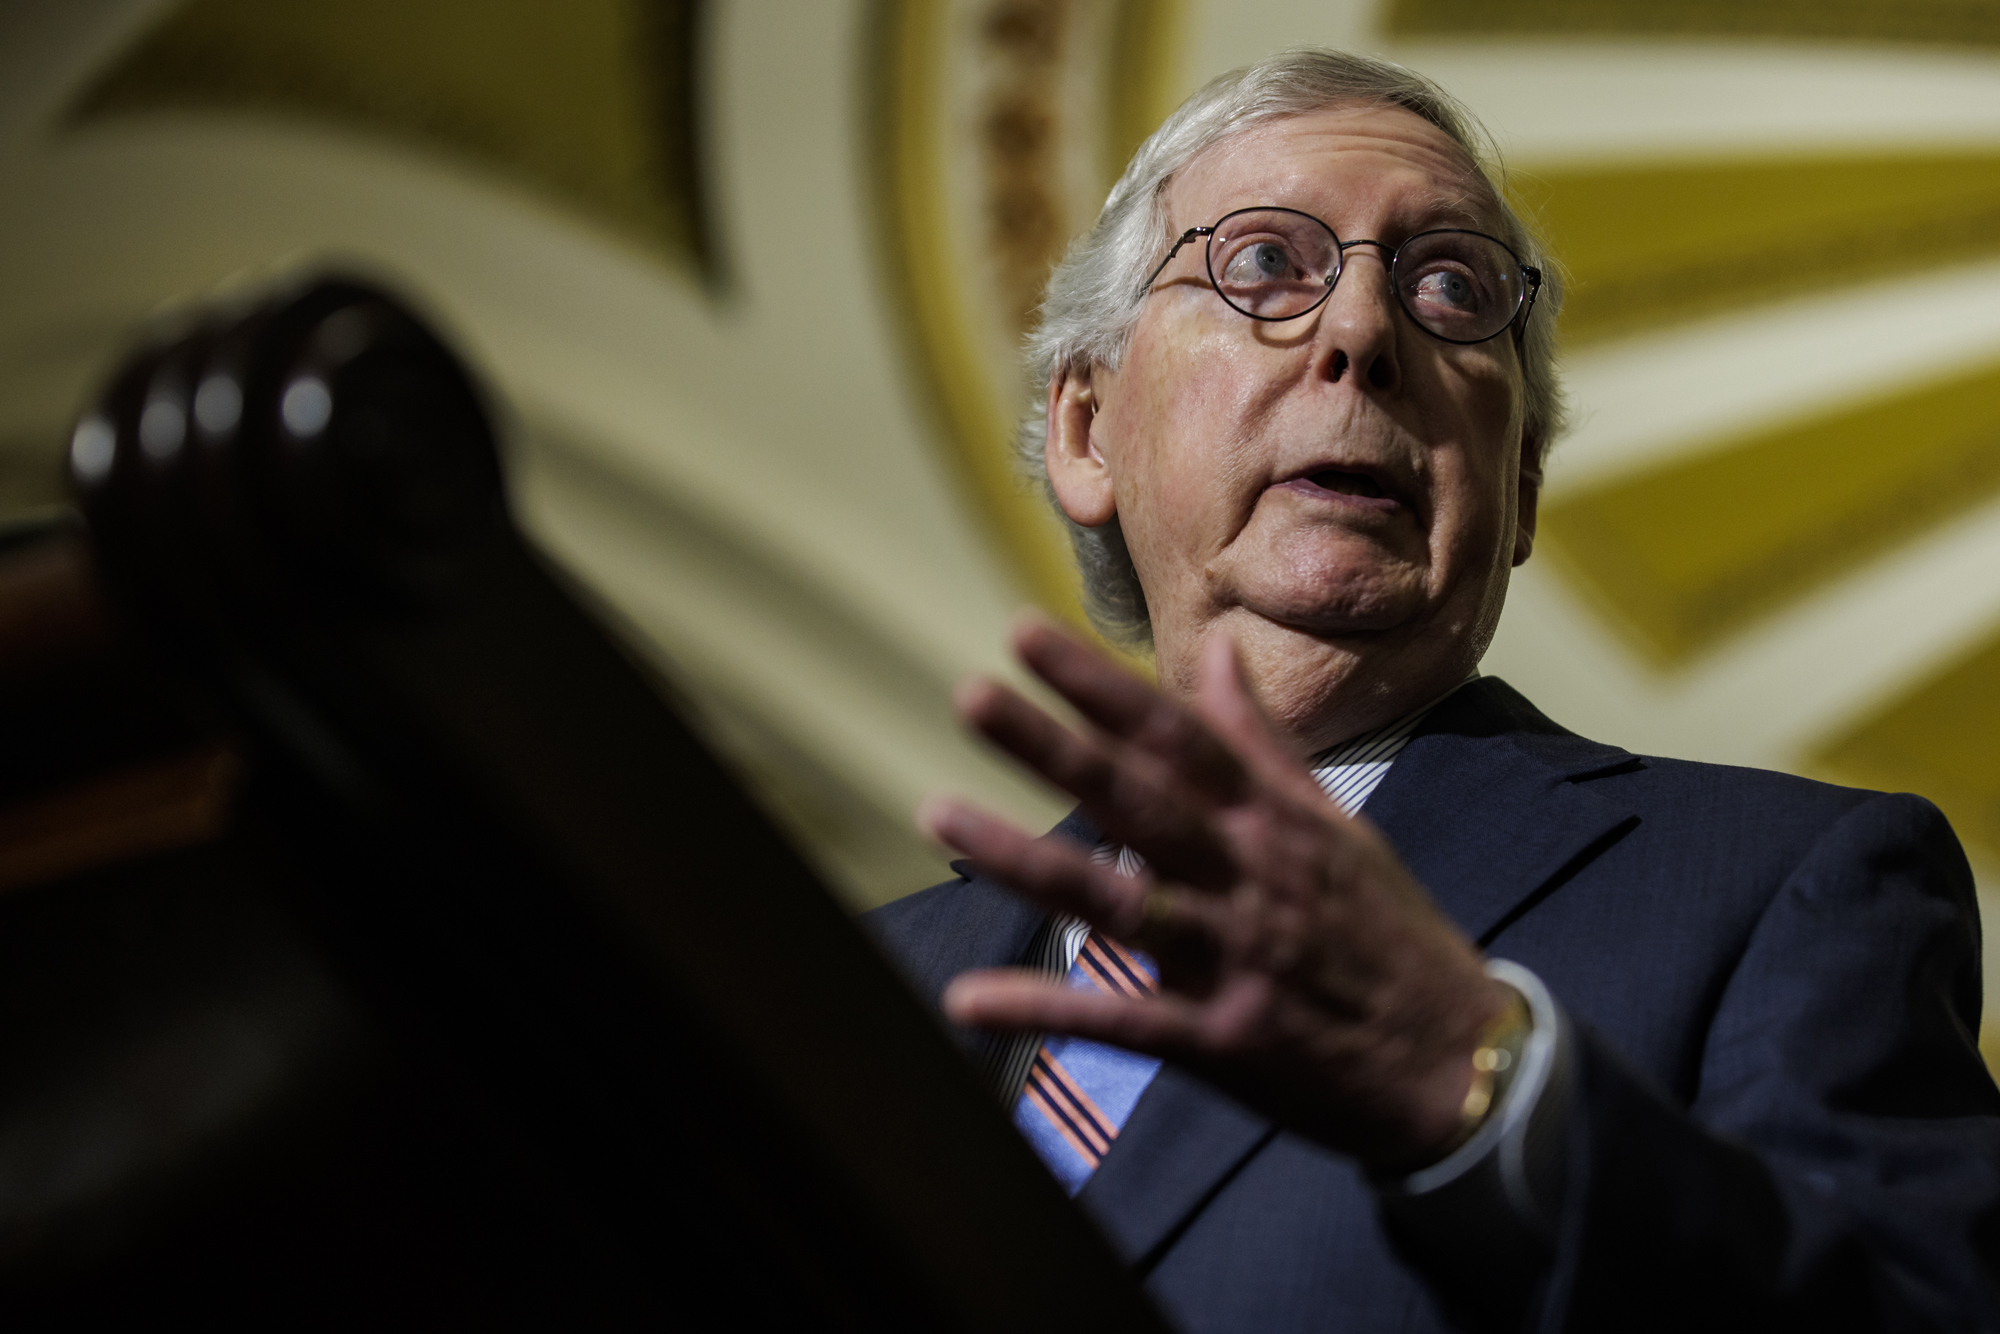 Senate Republican Leader Mitch McConnell speaks during a news conference at the US Capitol in Washington DC, on September, 28.